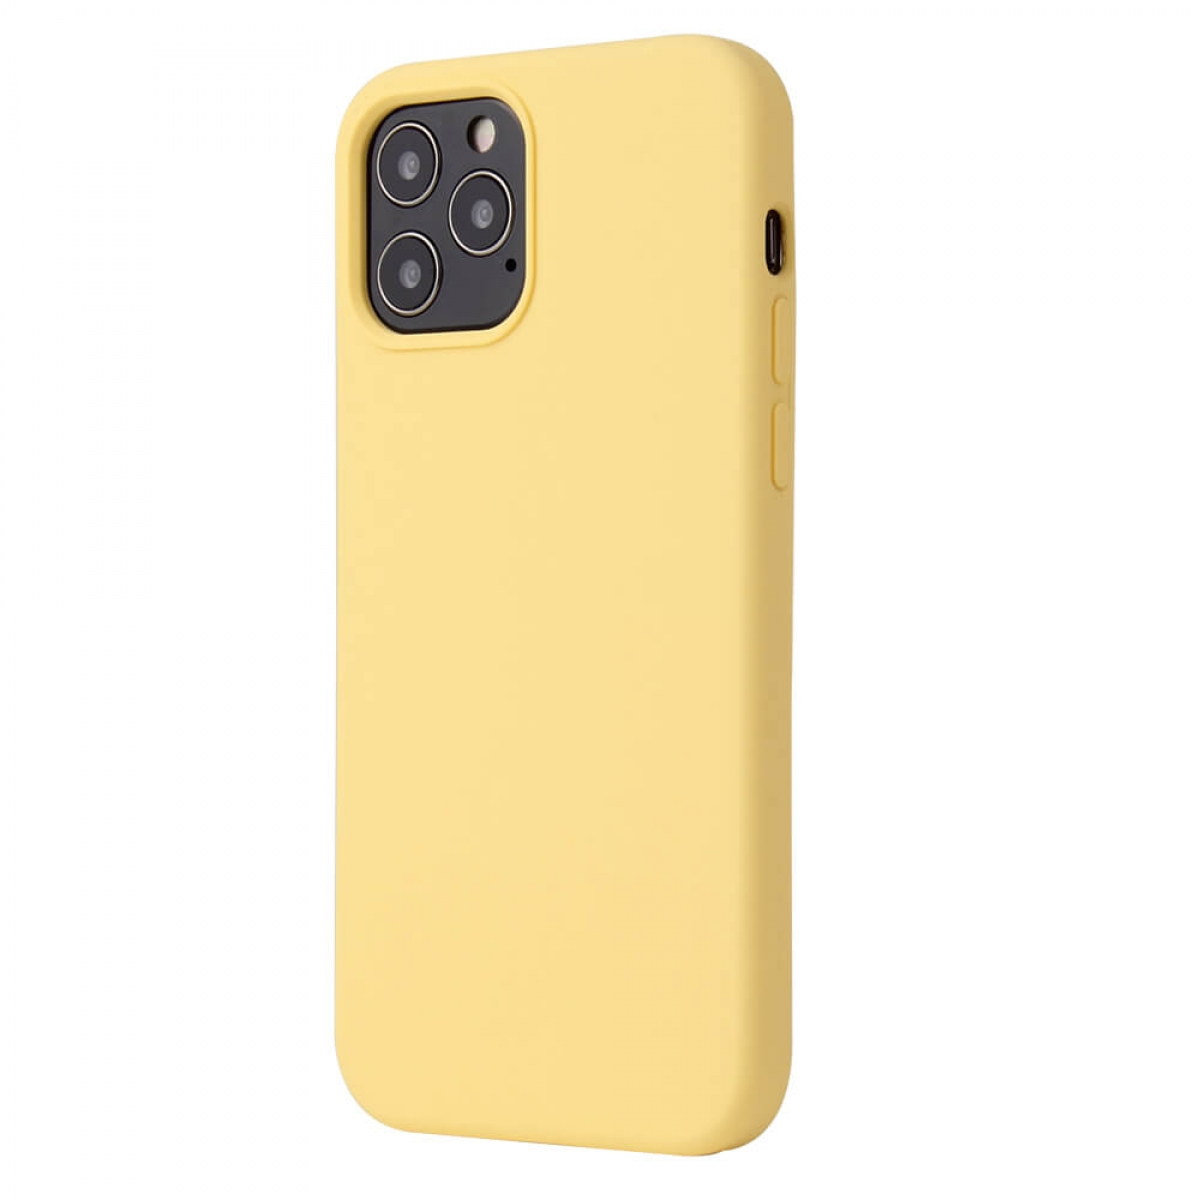 15 Backcover, Max, Liquid, Canary iPhone Yellow Pro CASEONLINE Apple,